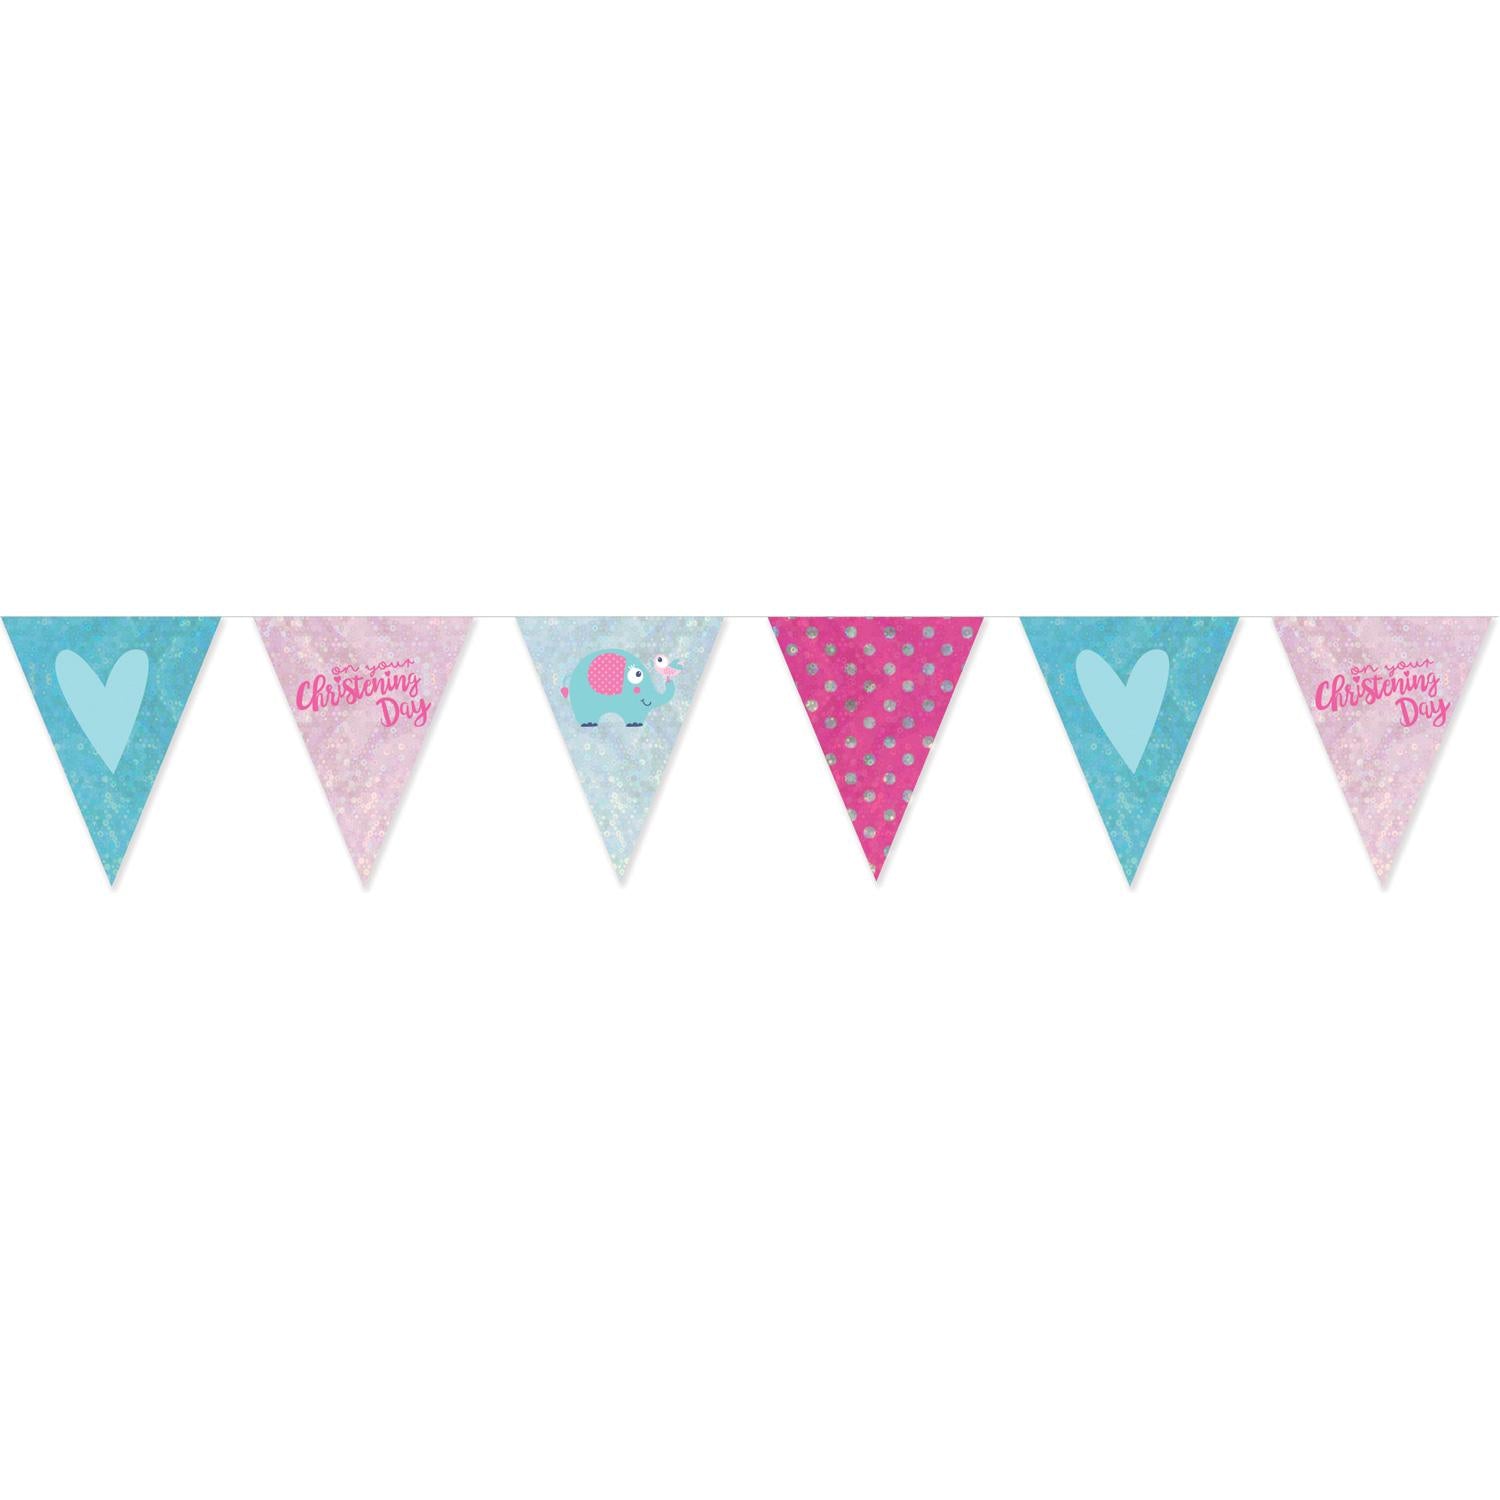 Christening Pink Pennant Banner Decorations - Party Centre